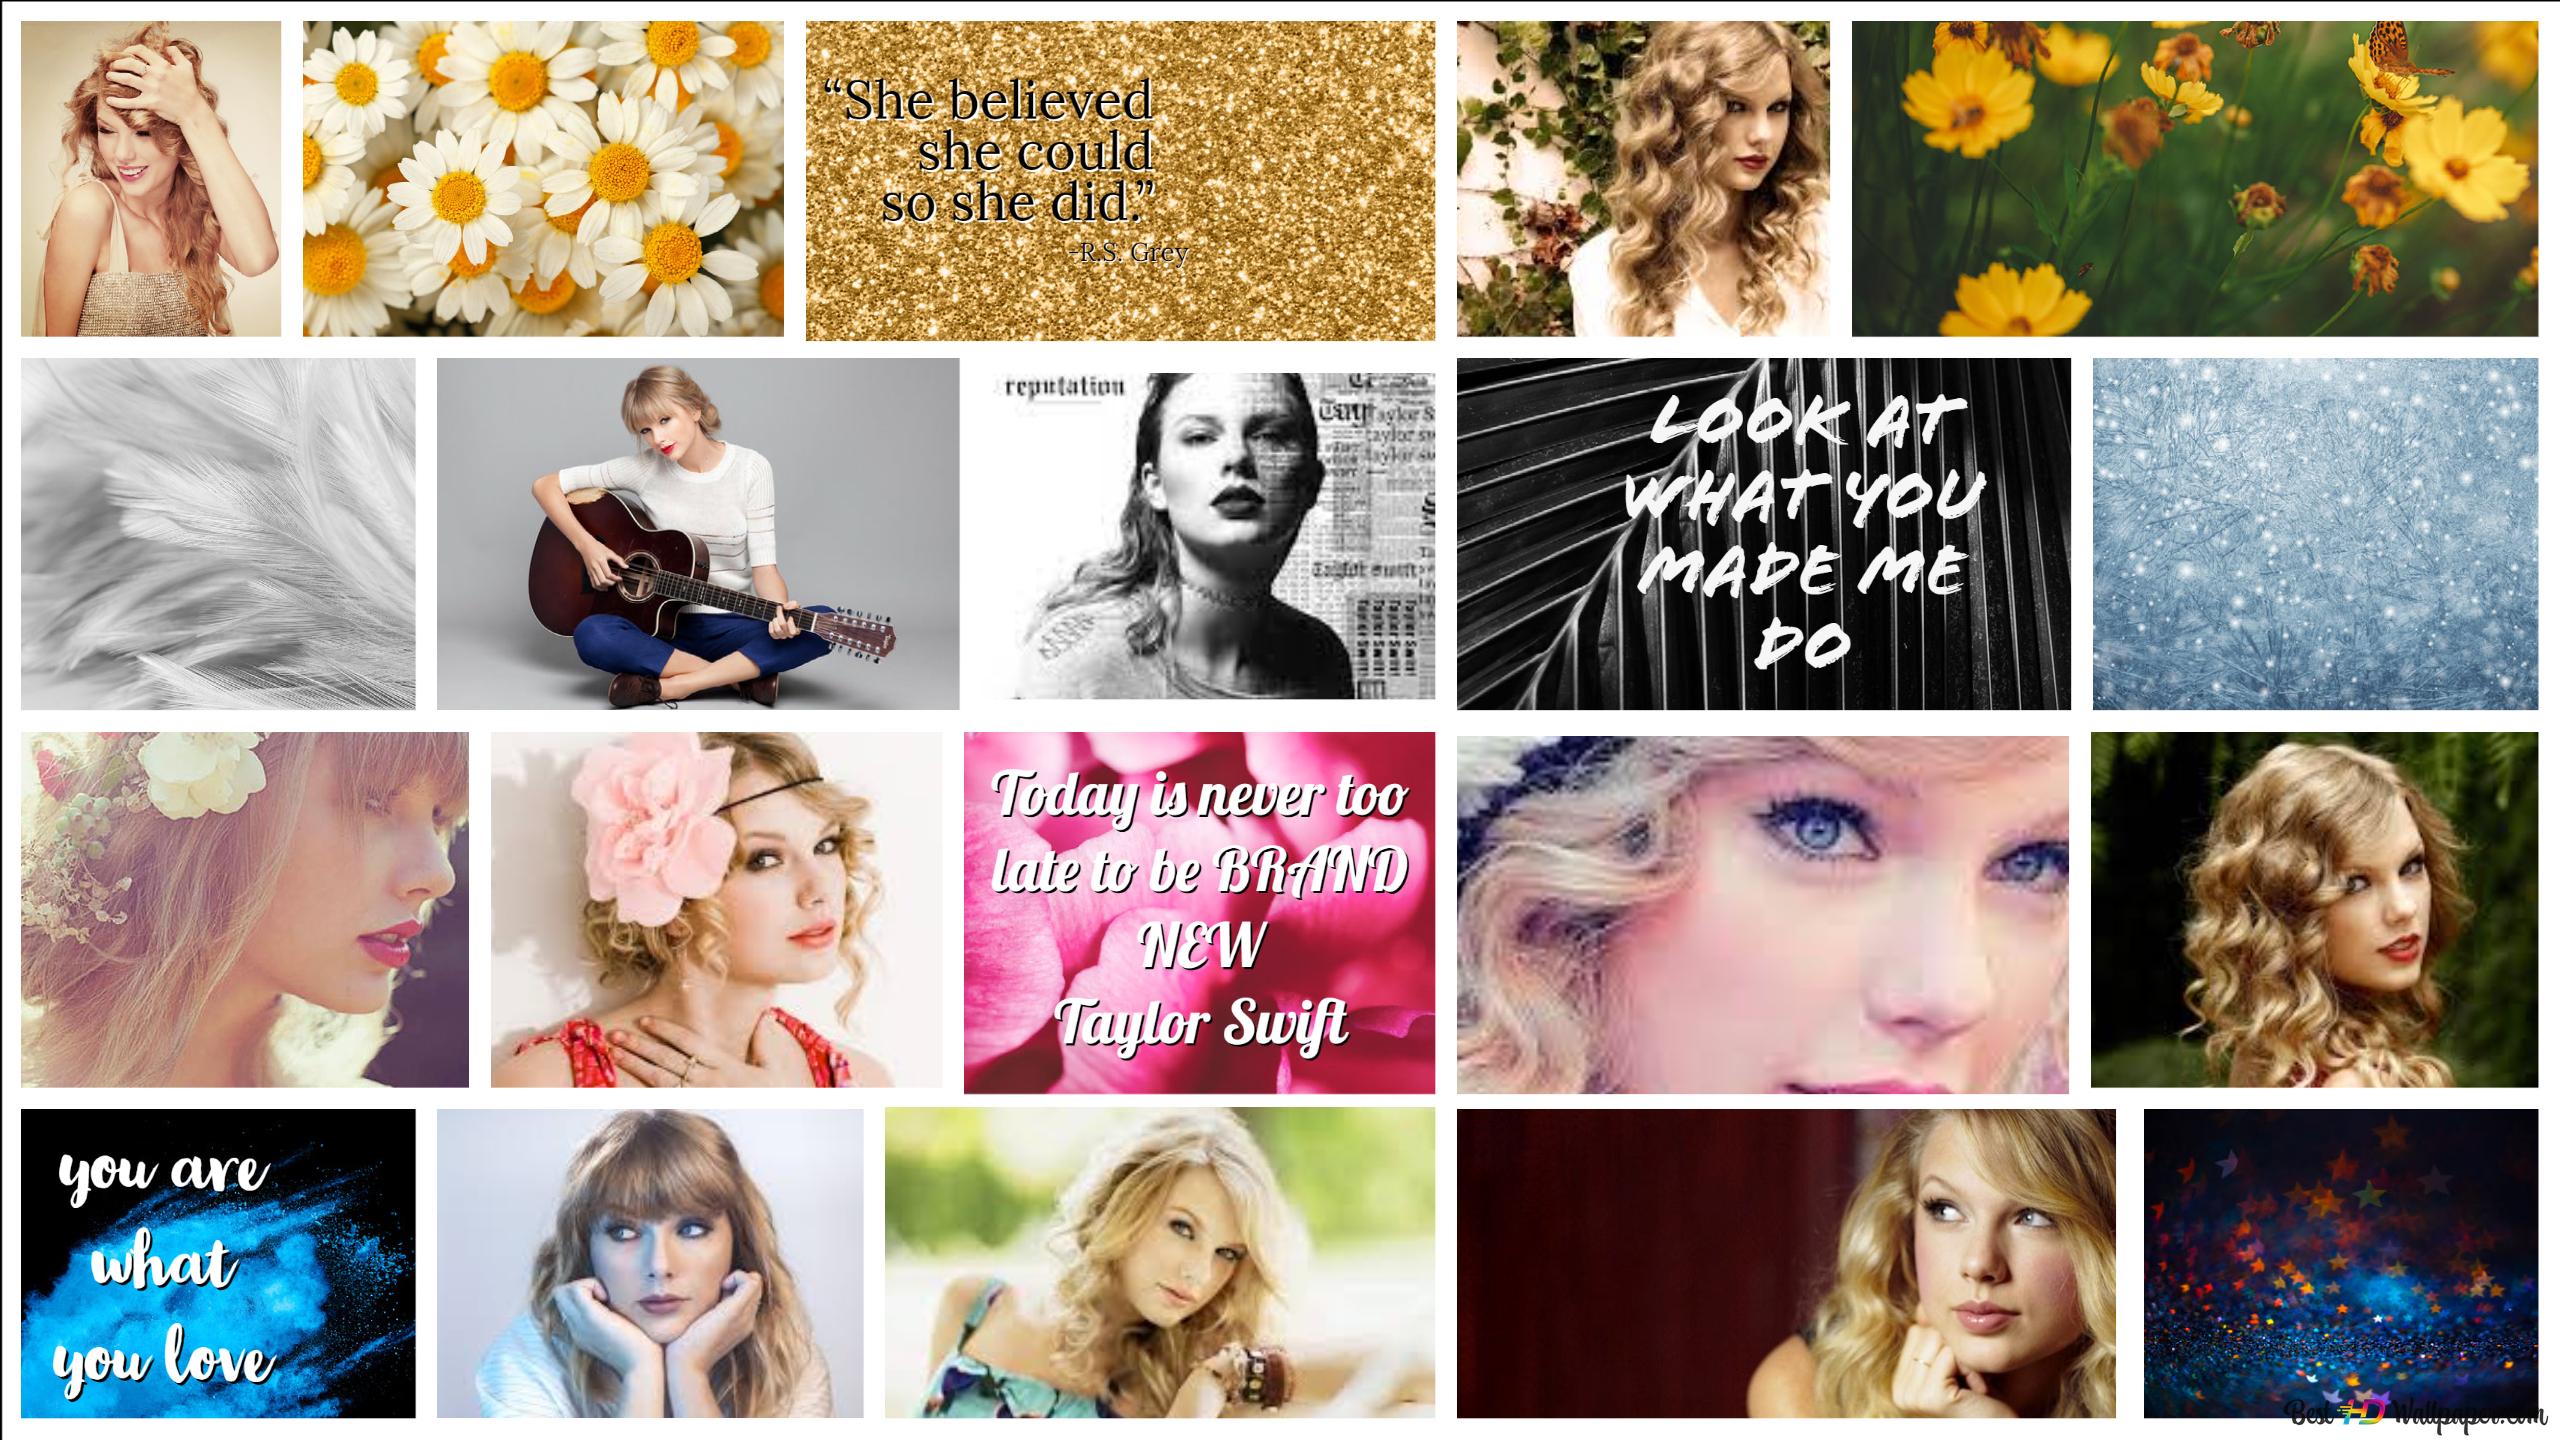 Ttaylor swift aesthetic background collage and quotes 2K wallpaper download